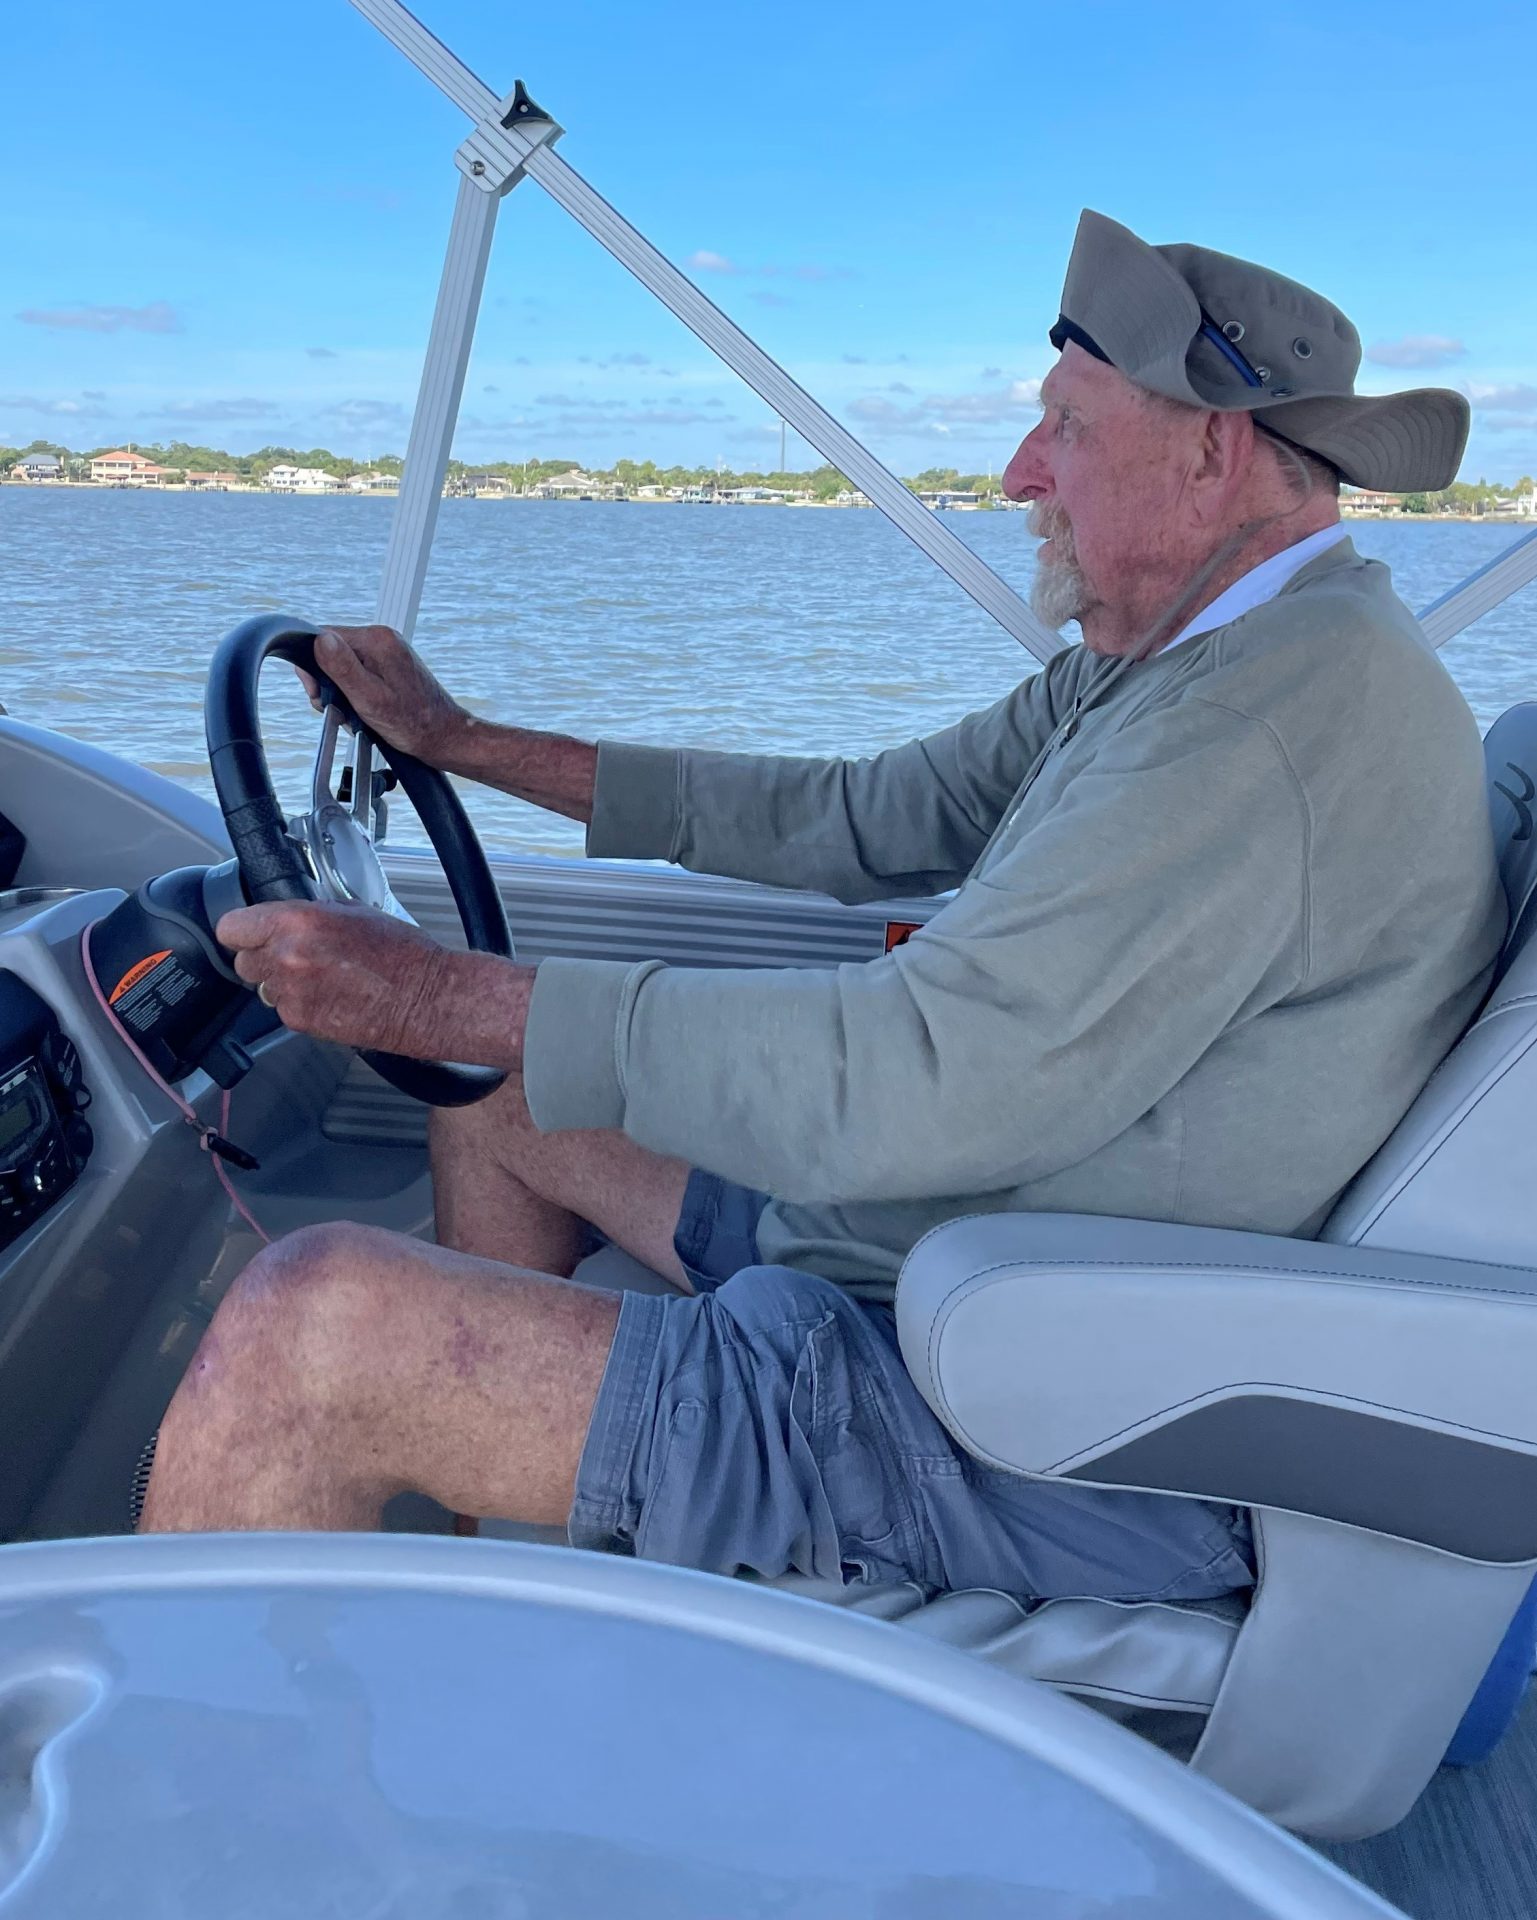 Dad driving the boat